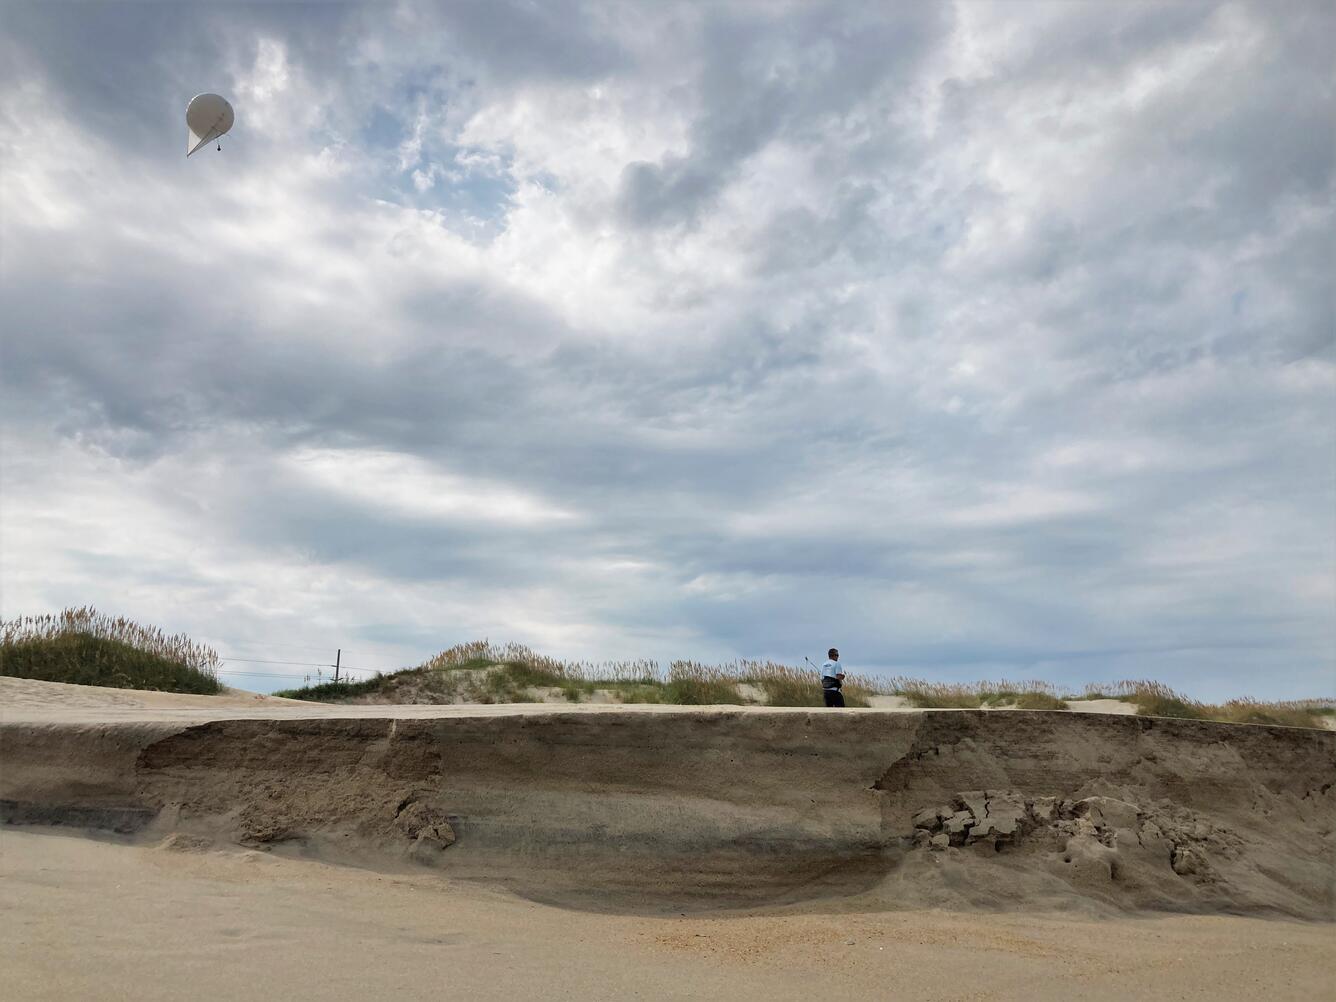 A person walks along a sandy scarped dune near the waves under a cloudy sky, pulling along a white balloon-shaped kite